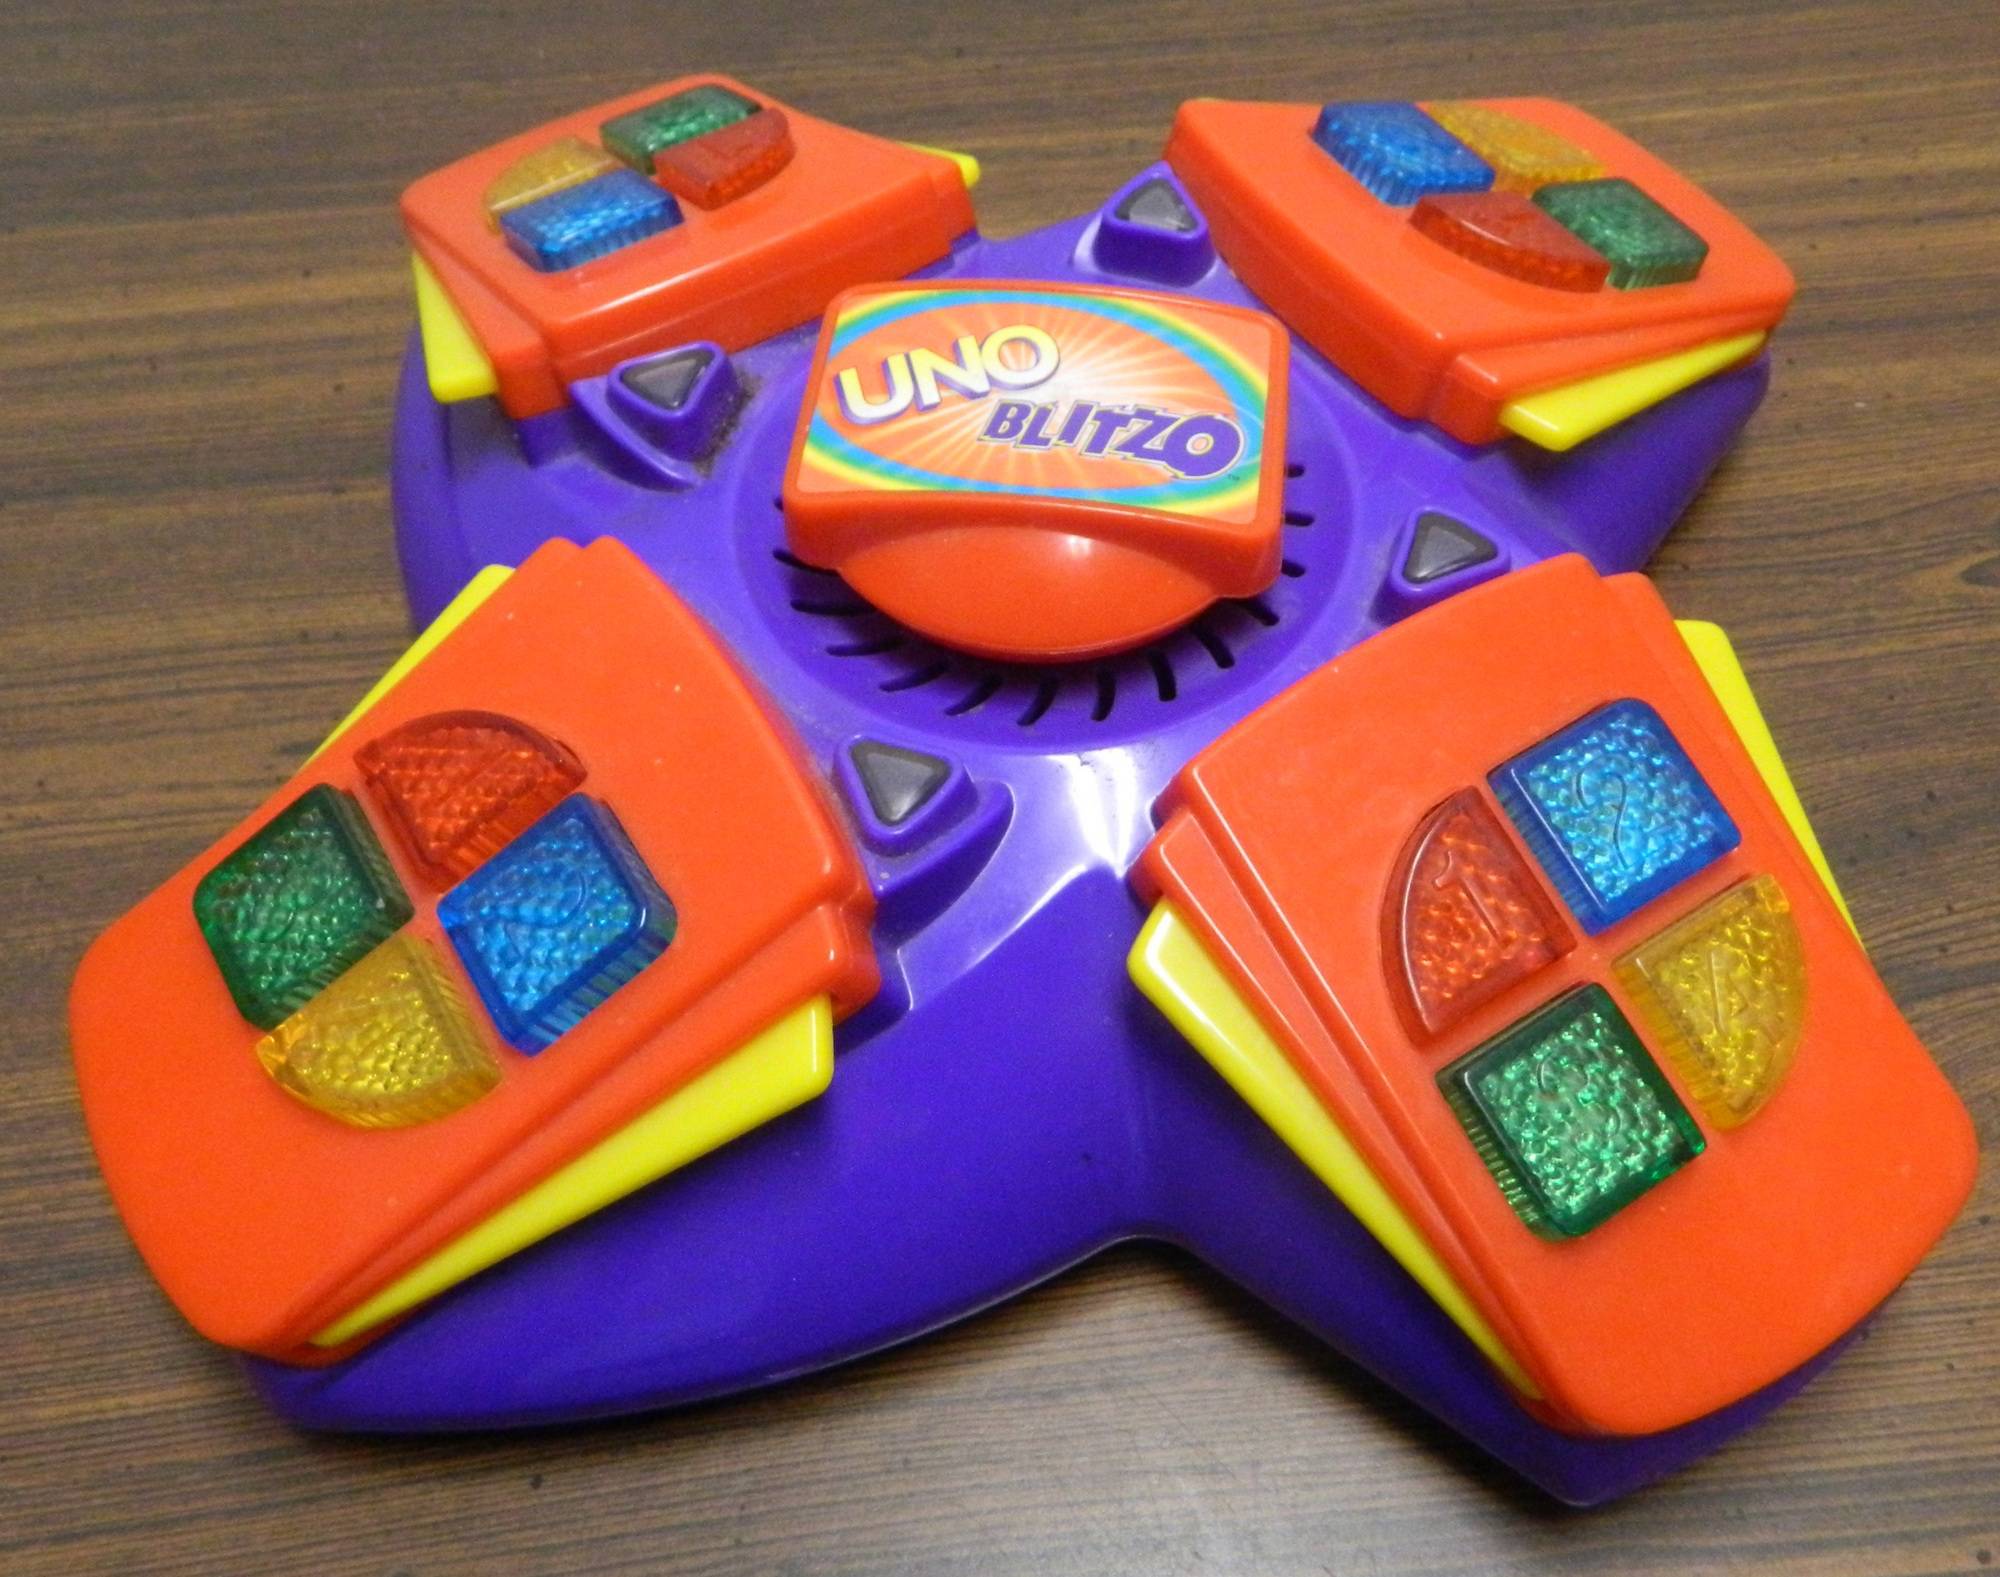 Mattel UNO Blitzo Electronic Game RARE Year 2000 Edition for sale online 